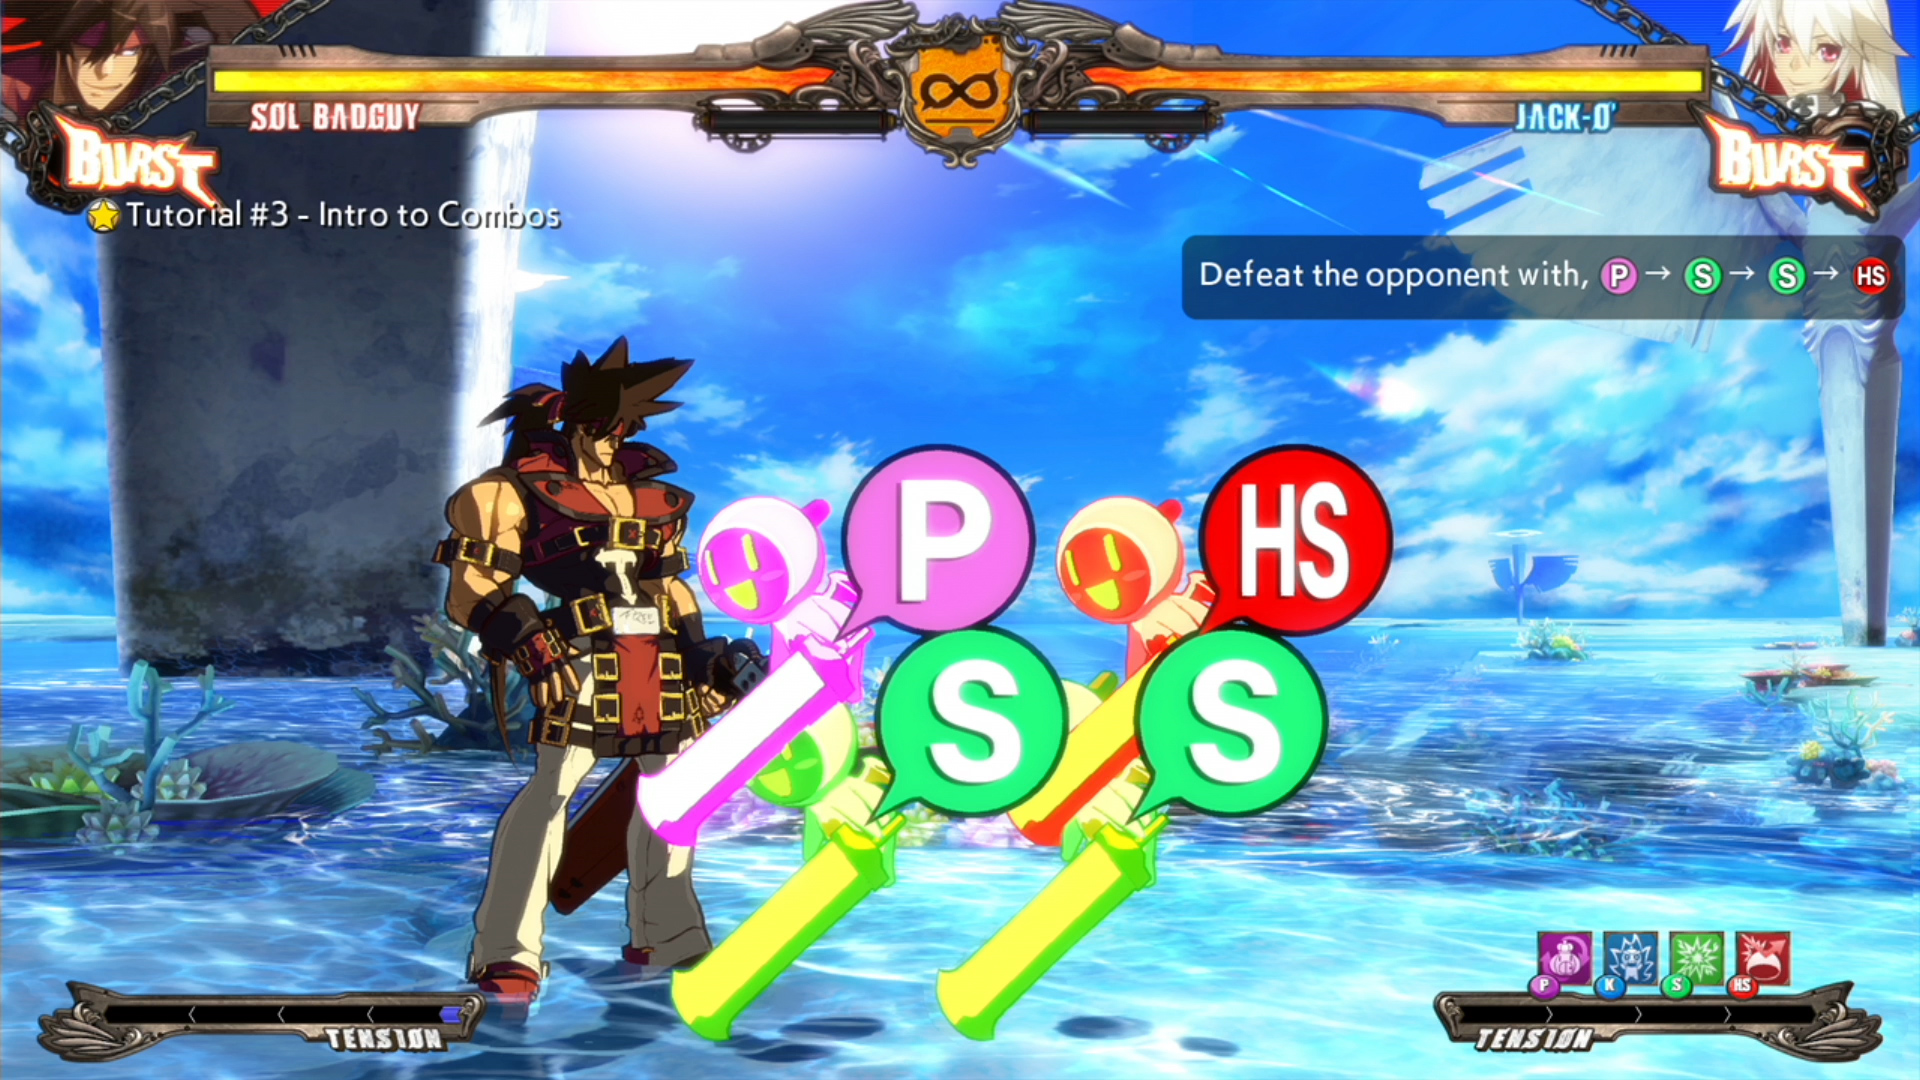 The New Guilty Gear Makes Learning Fun